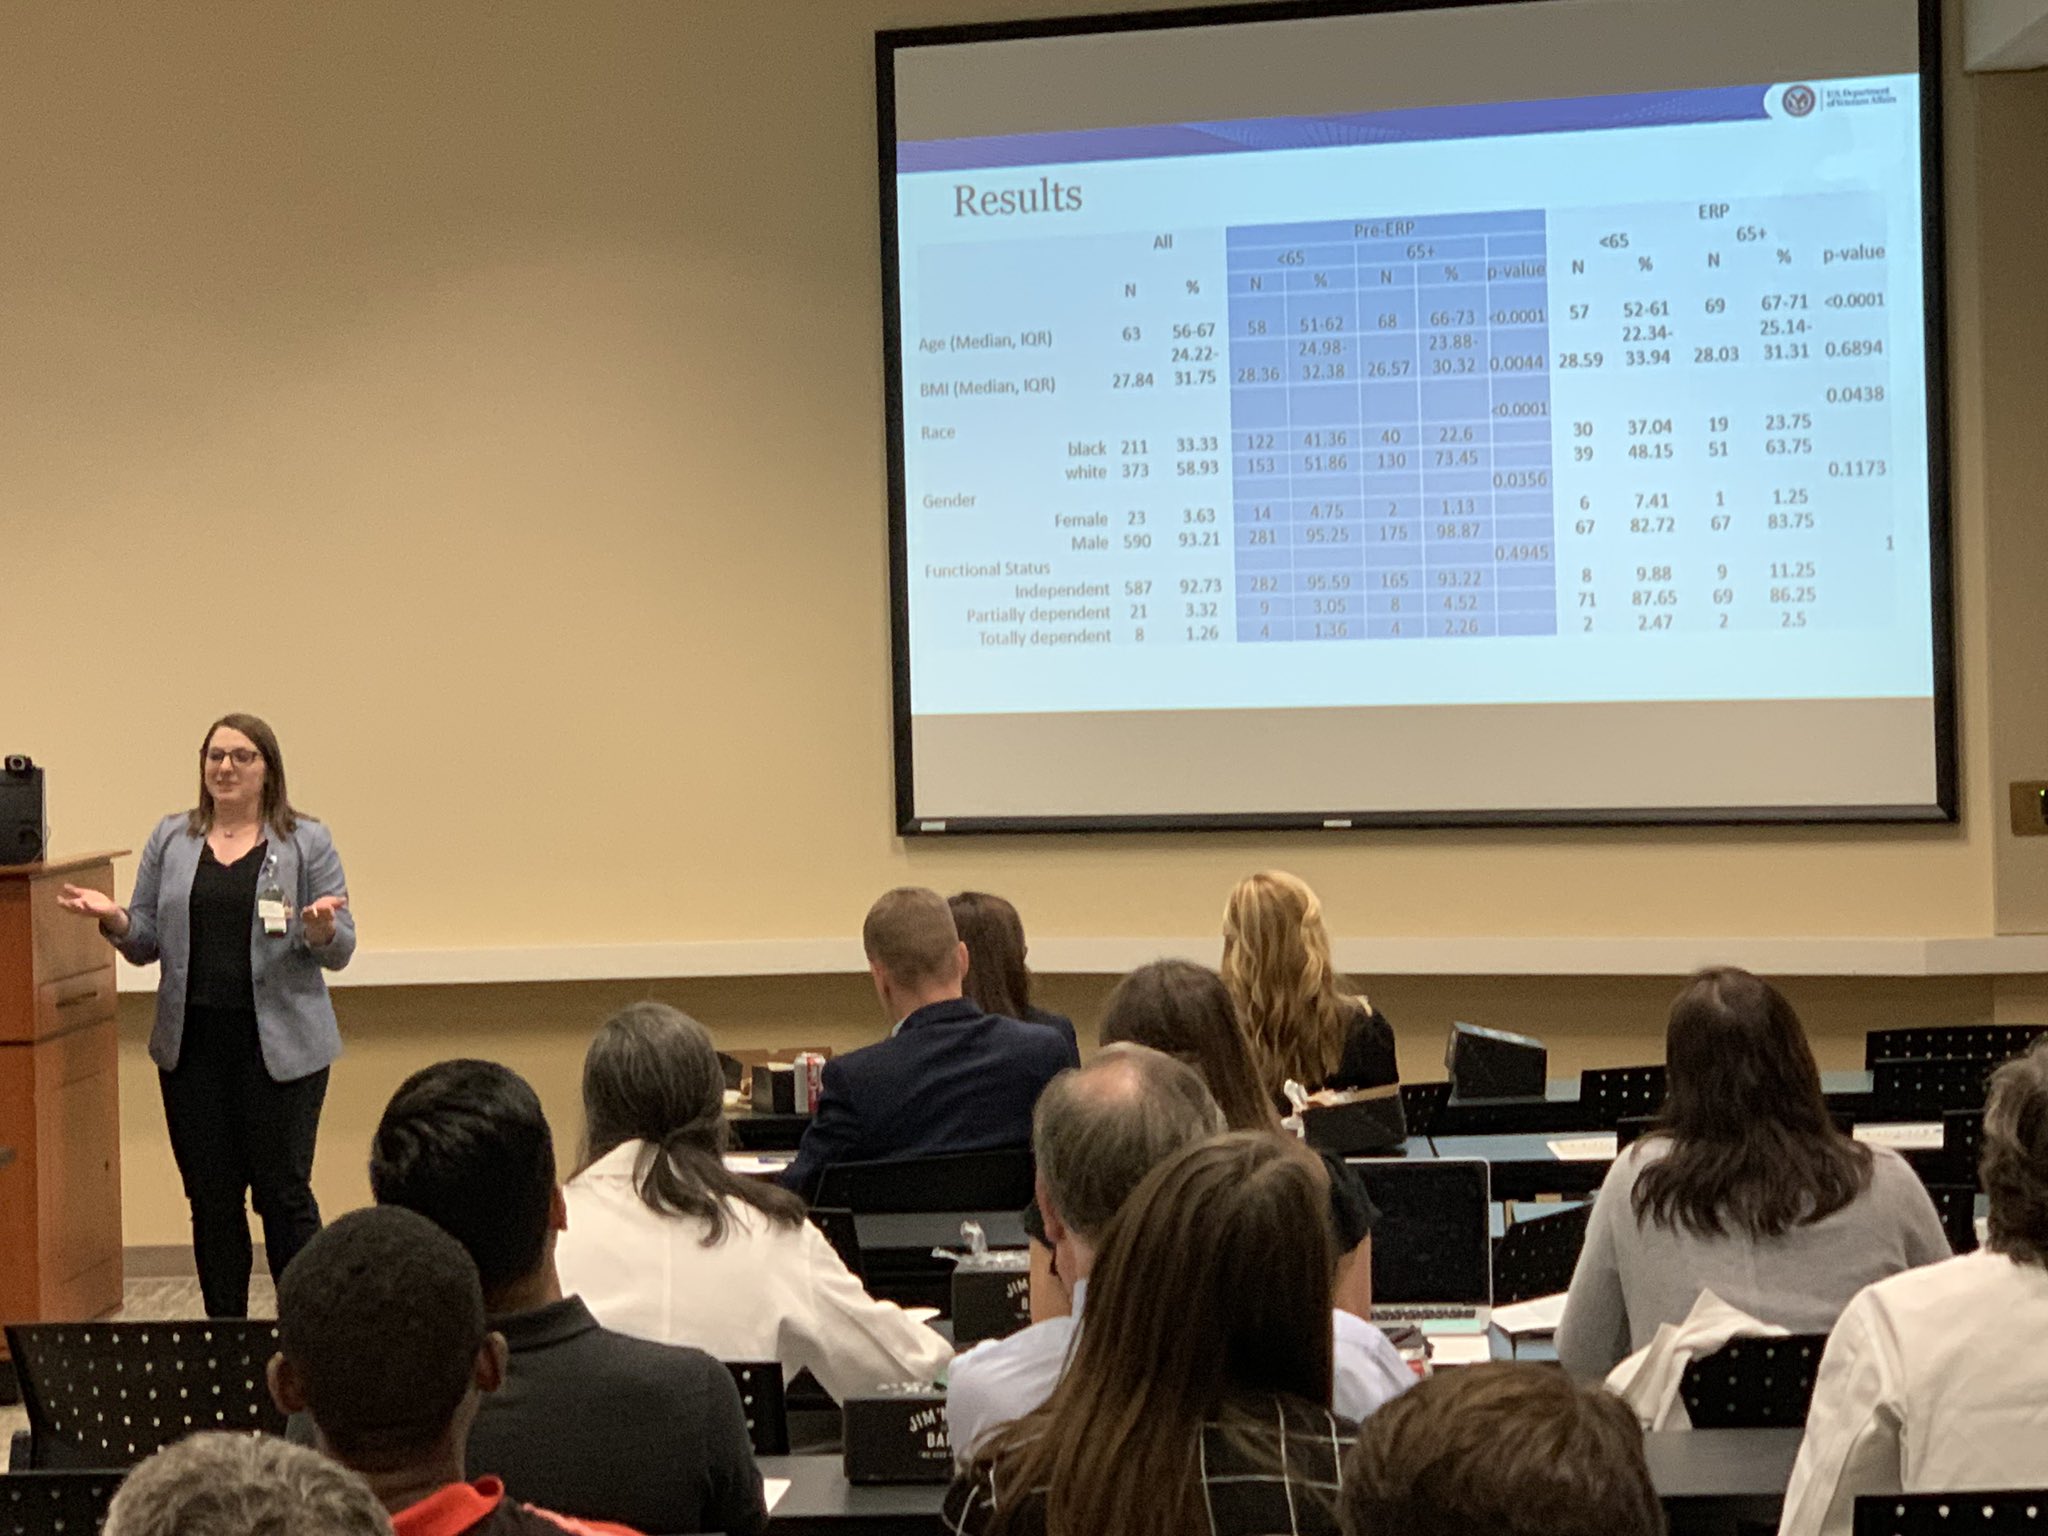 Dr. Samantha Baker discusses her research with her presentation, titled "Enhanced Recovery Pathway after Surgery Benefits Elderly Patients at the VA."